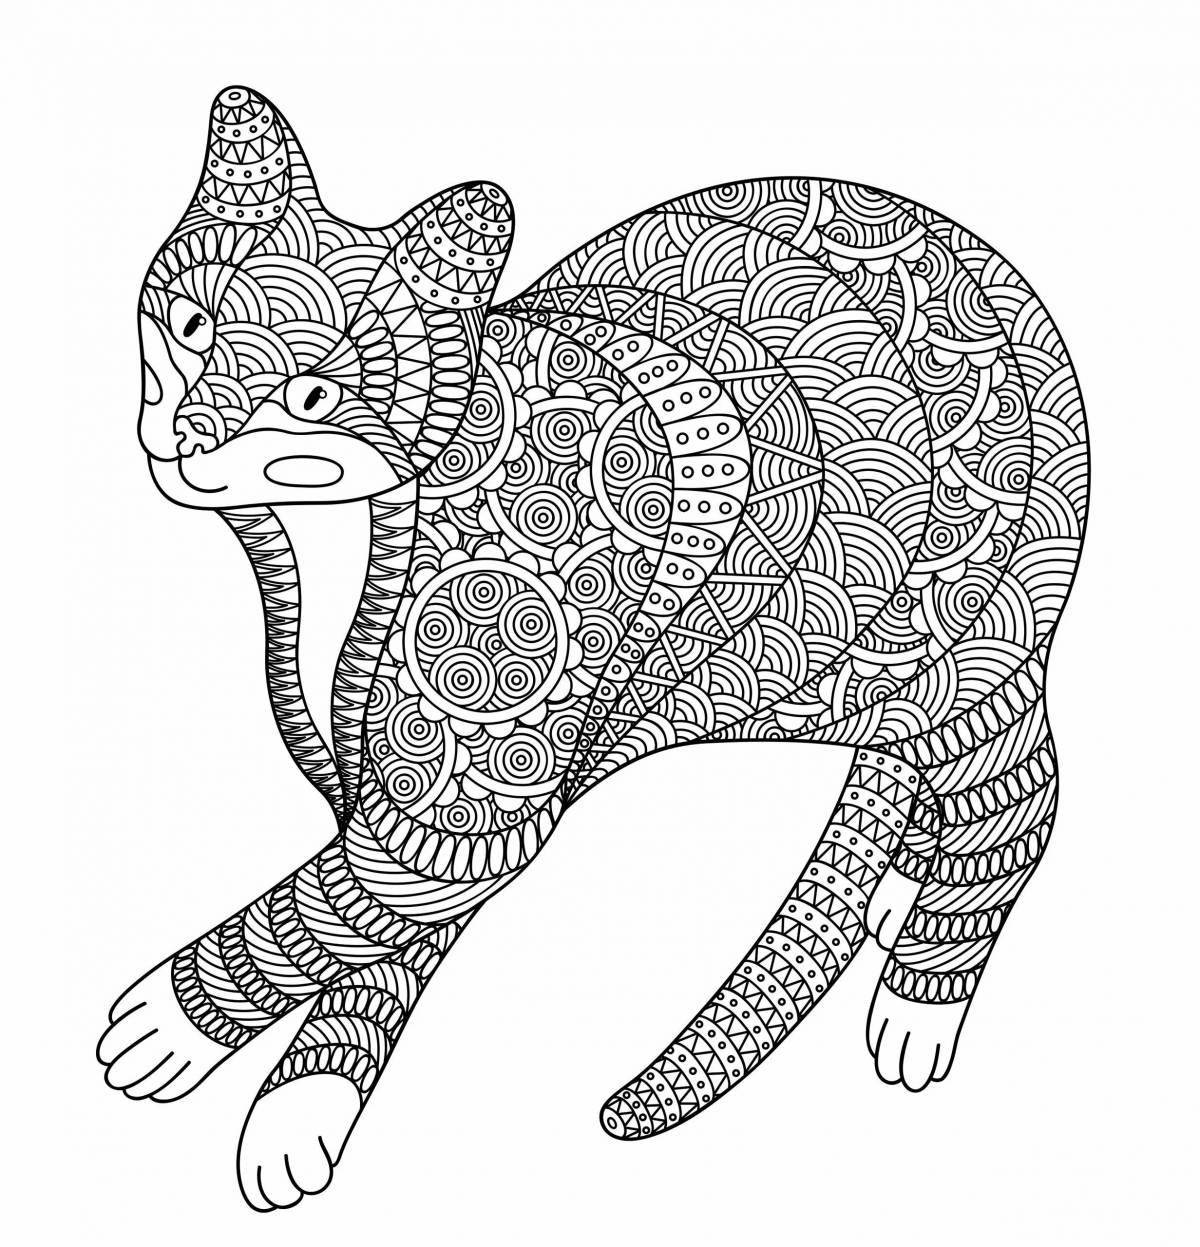 Sweet spiral cat coloring page